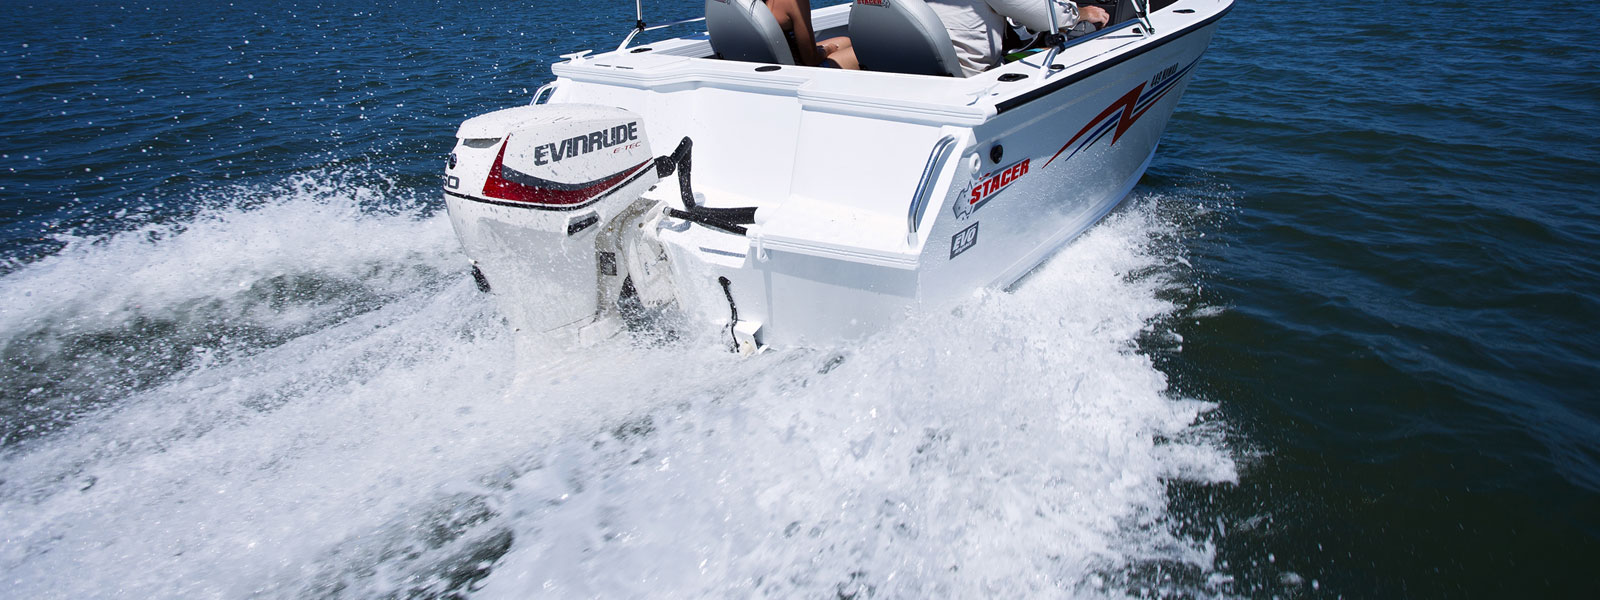 115HP and 60HP Evinrude engines